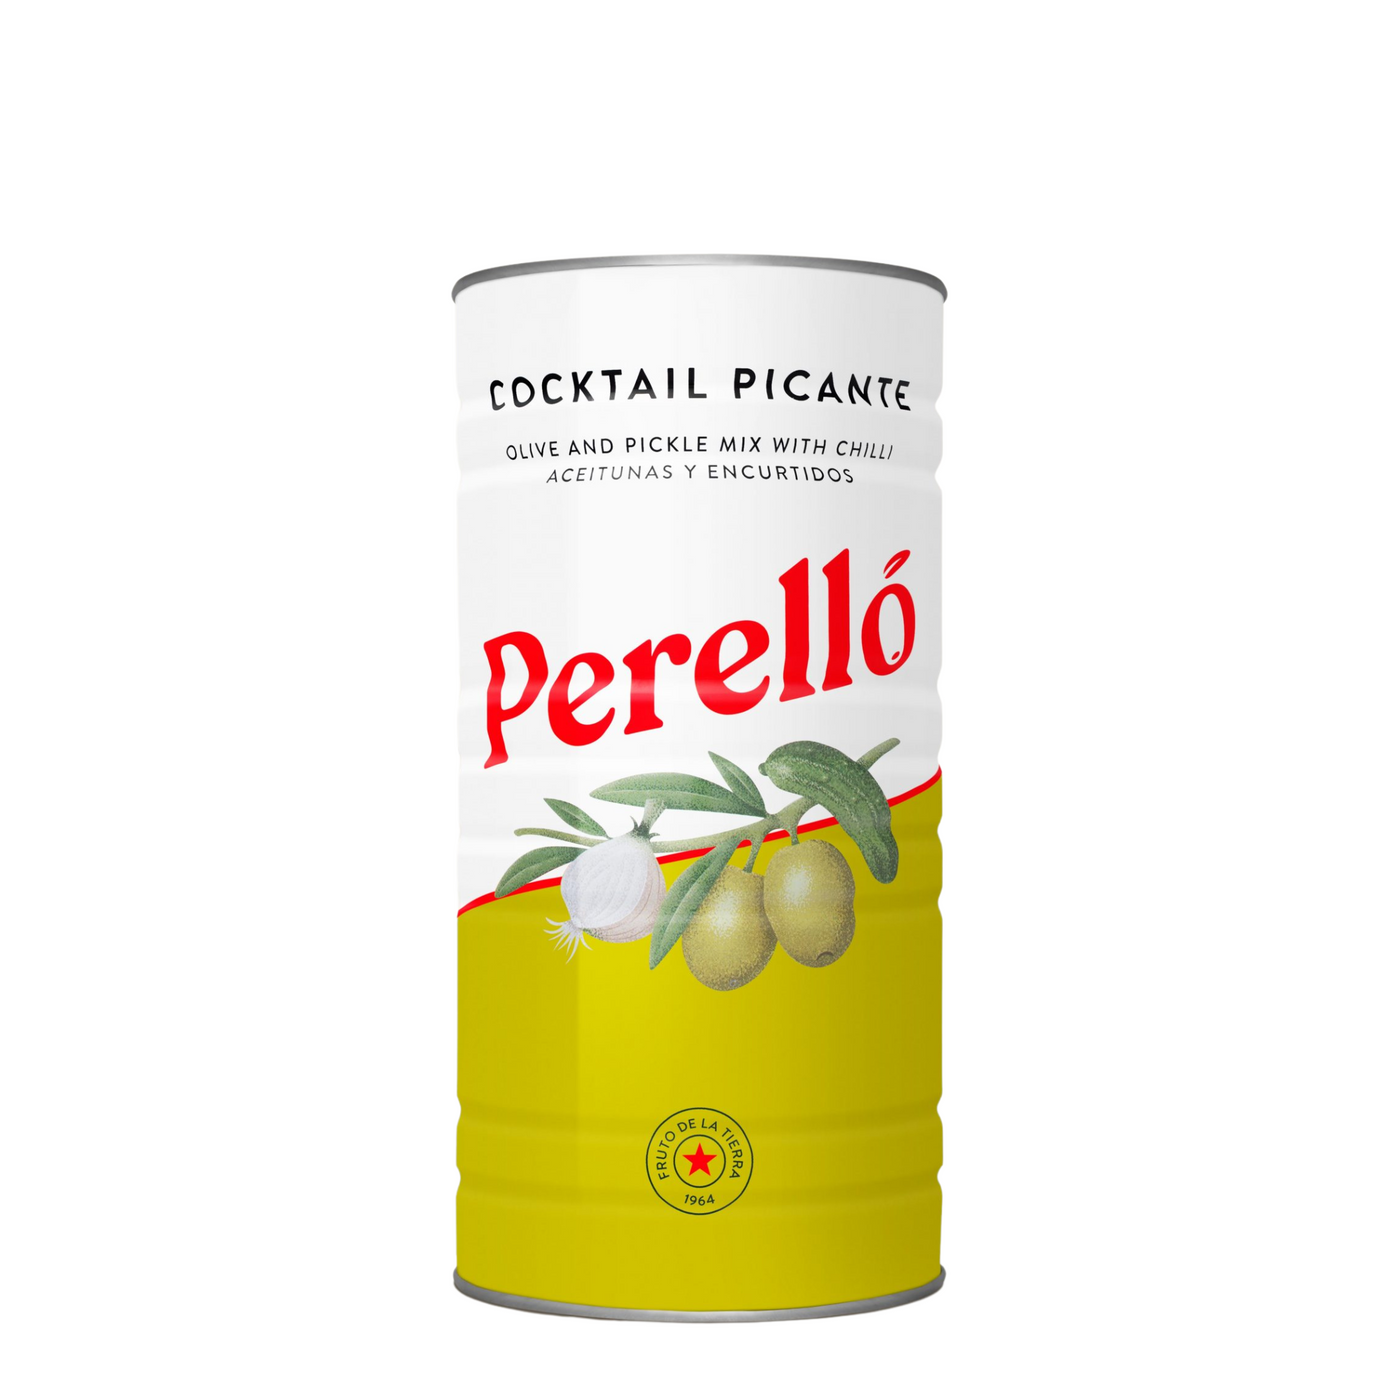 Perello Cocktail - Picante Pitted 350g Tin